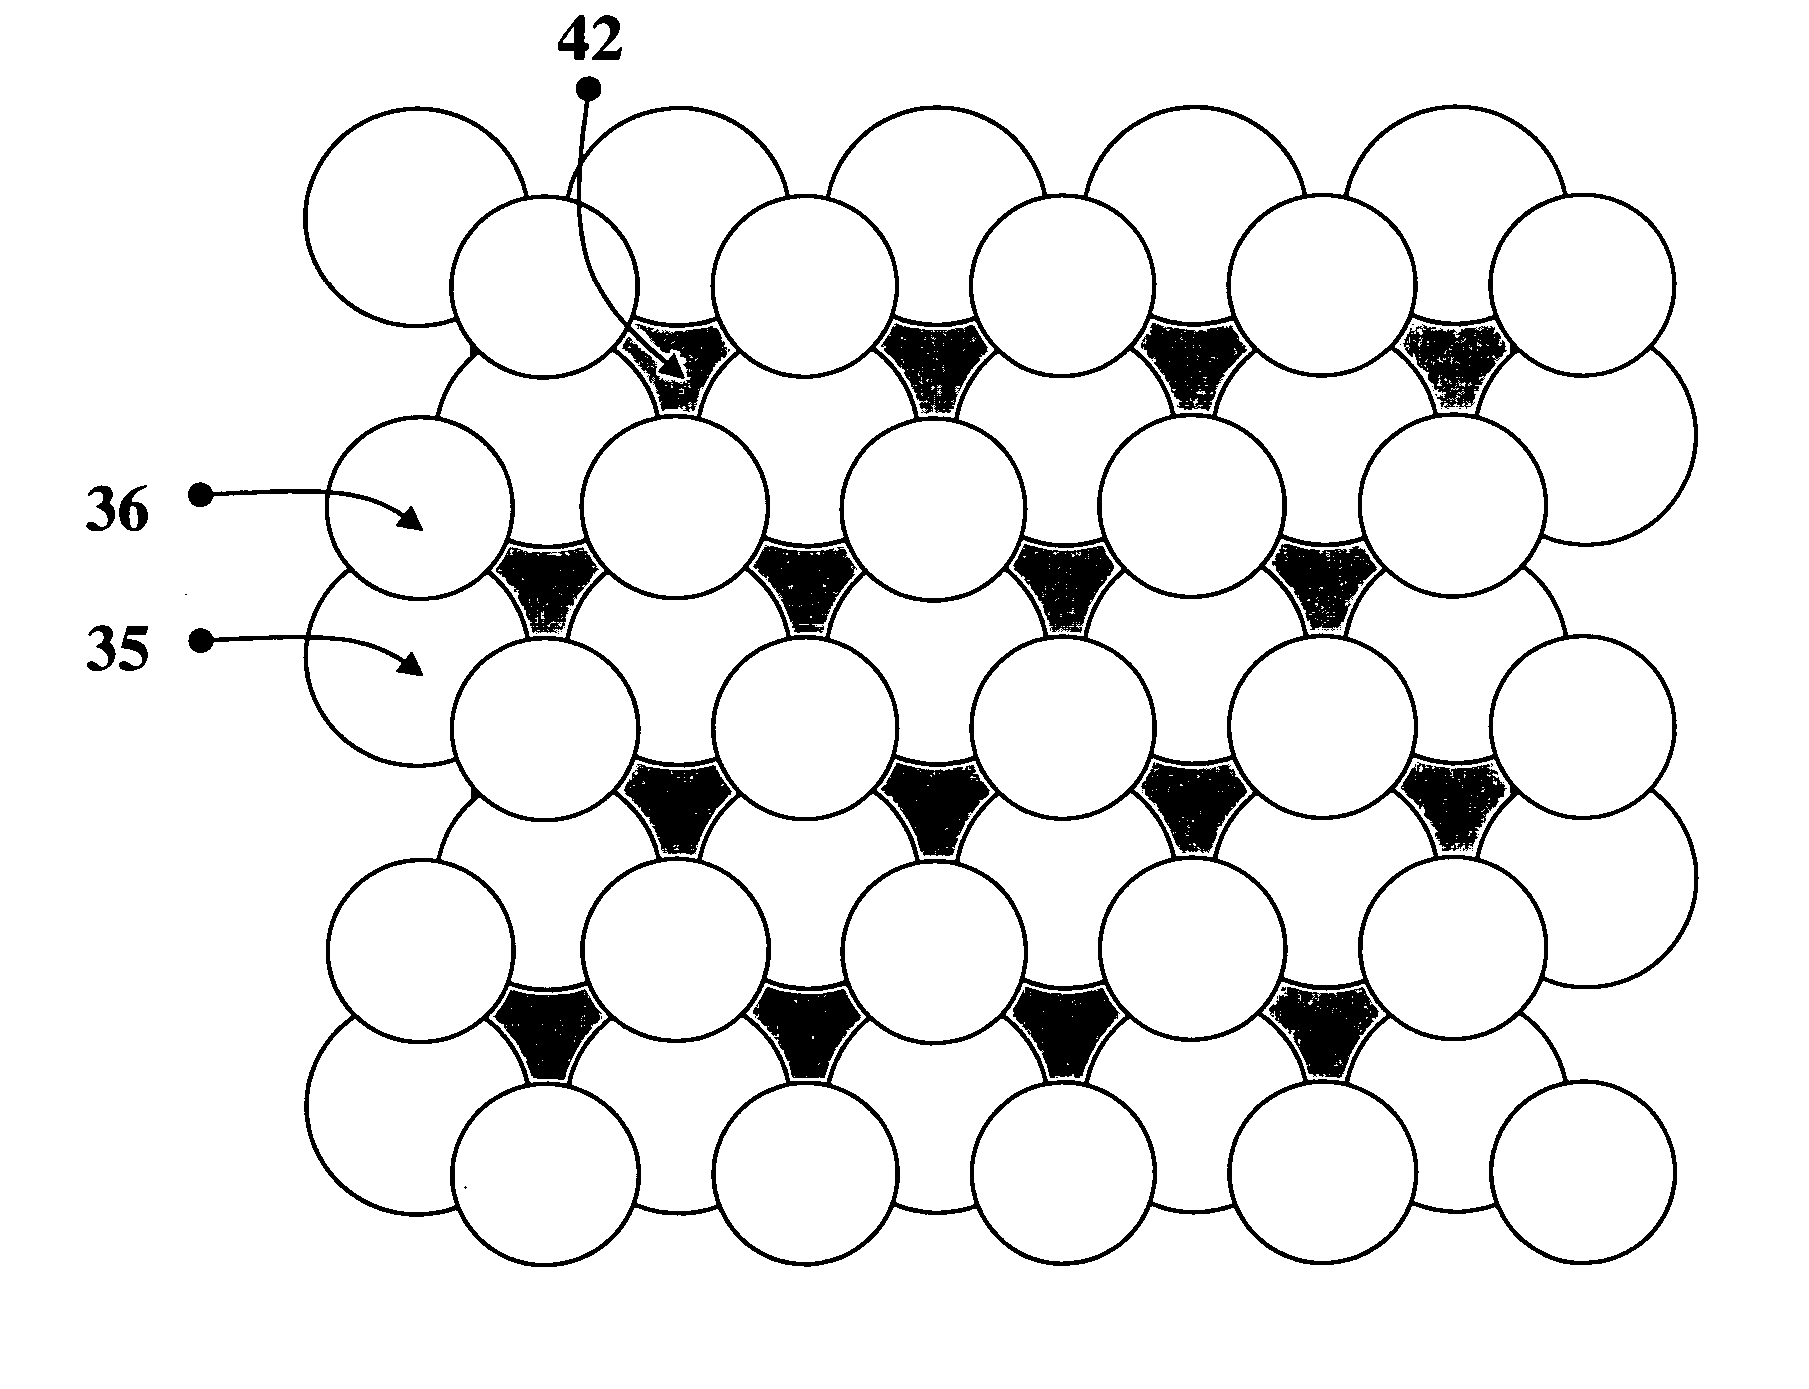 Method of fabricating periodic nano-structure arrays with different feature sizes